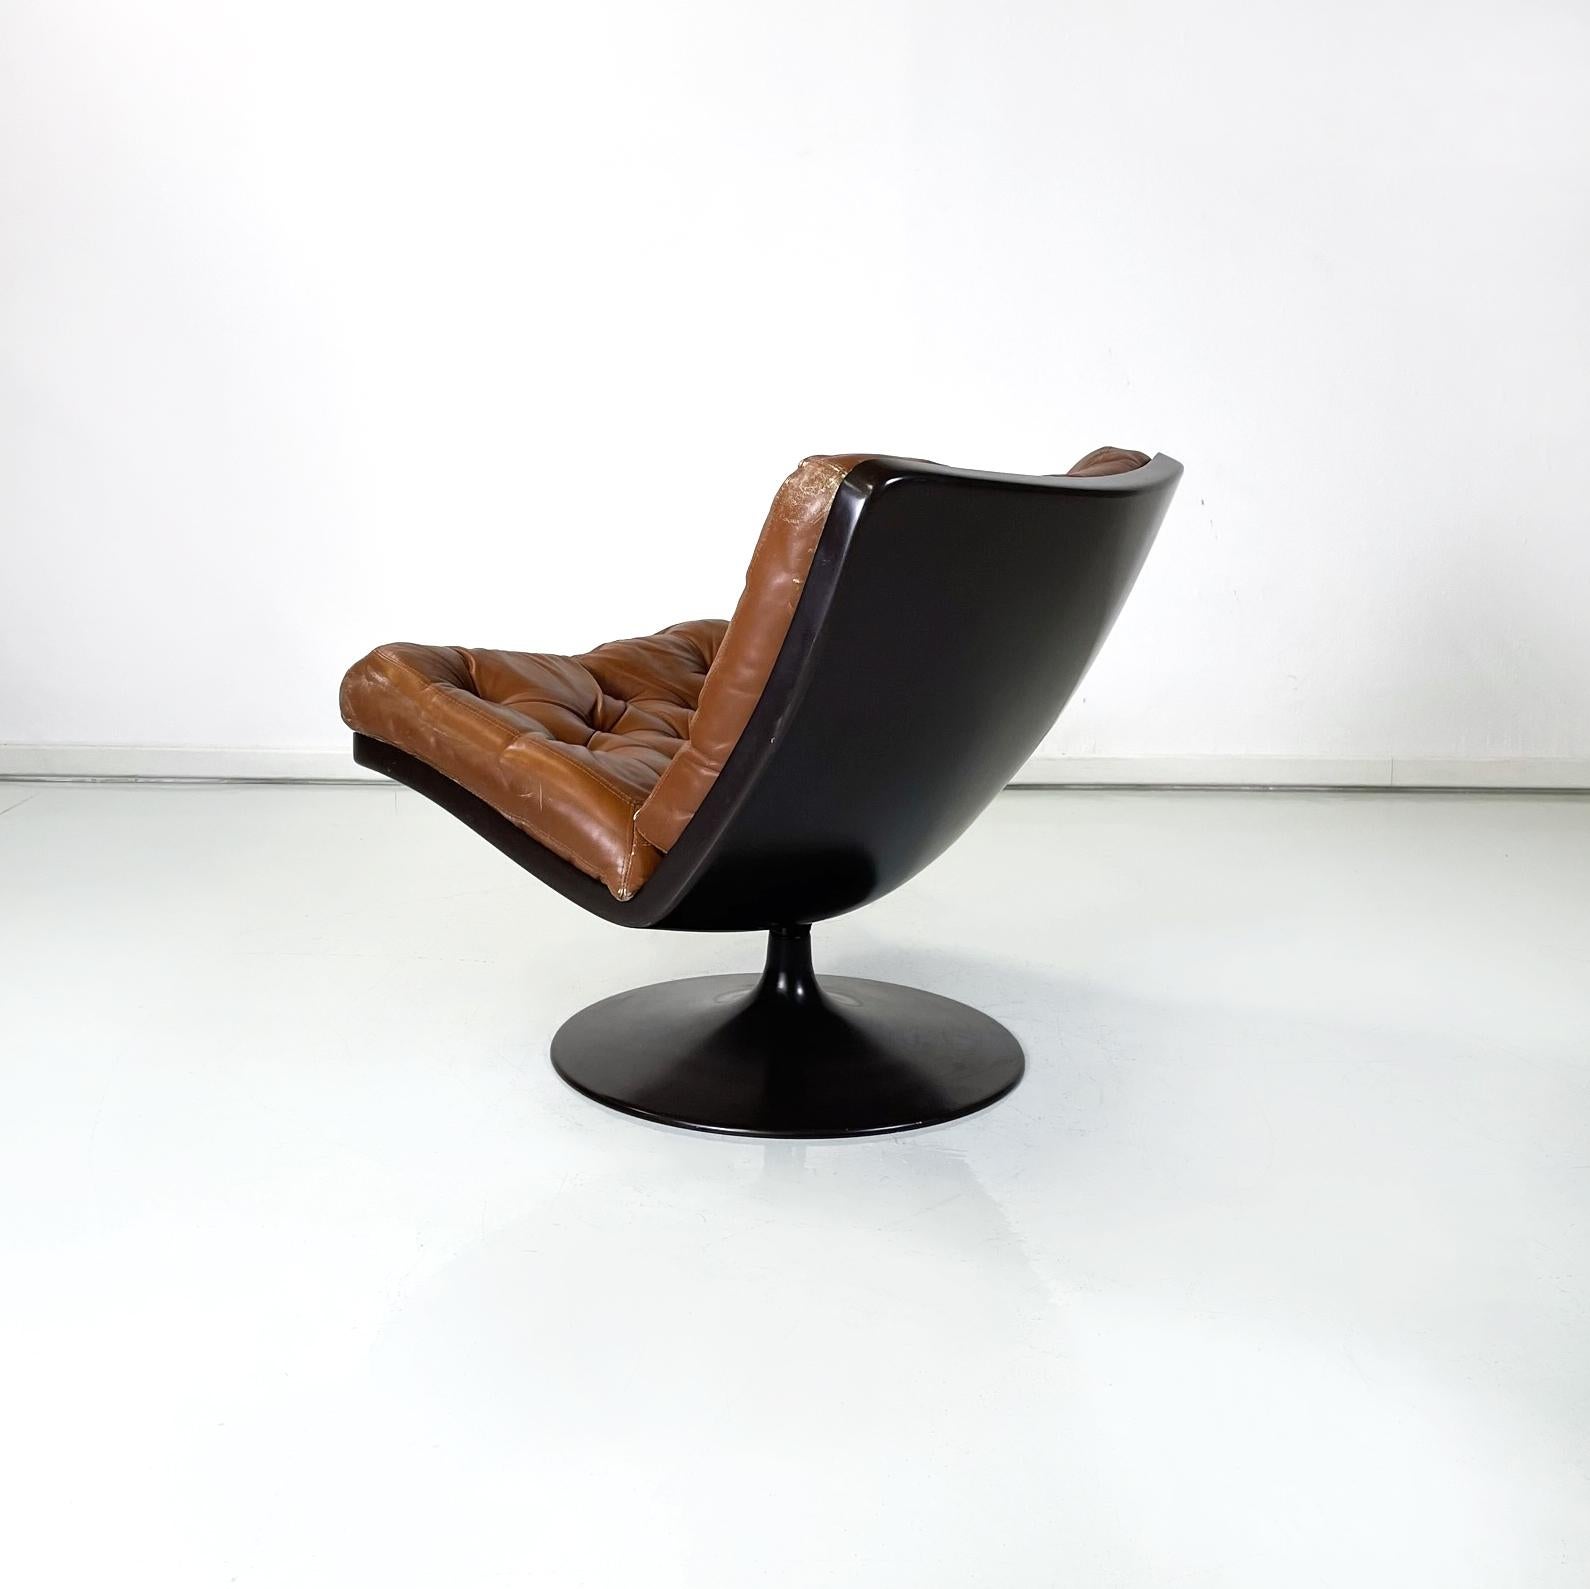 Late 20th Century Italian Space Age Armchair in Brown Leather and Black Plastic by Play, 1970s For Sale